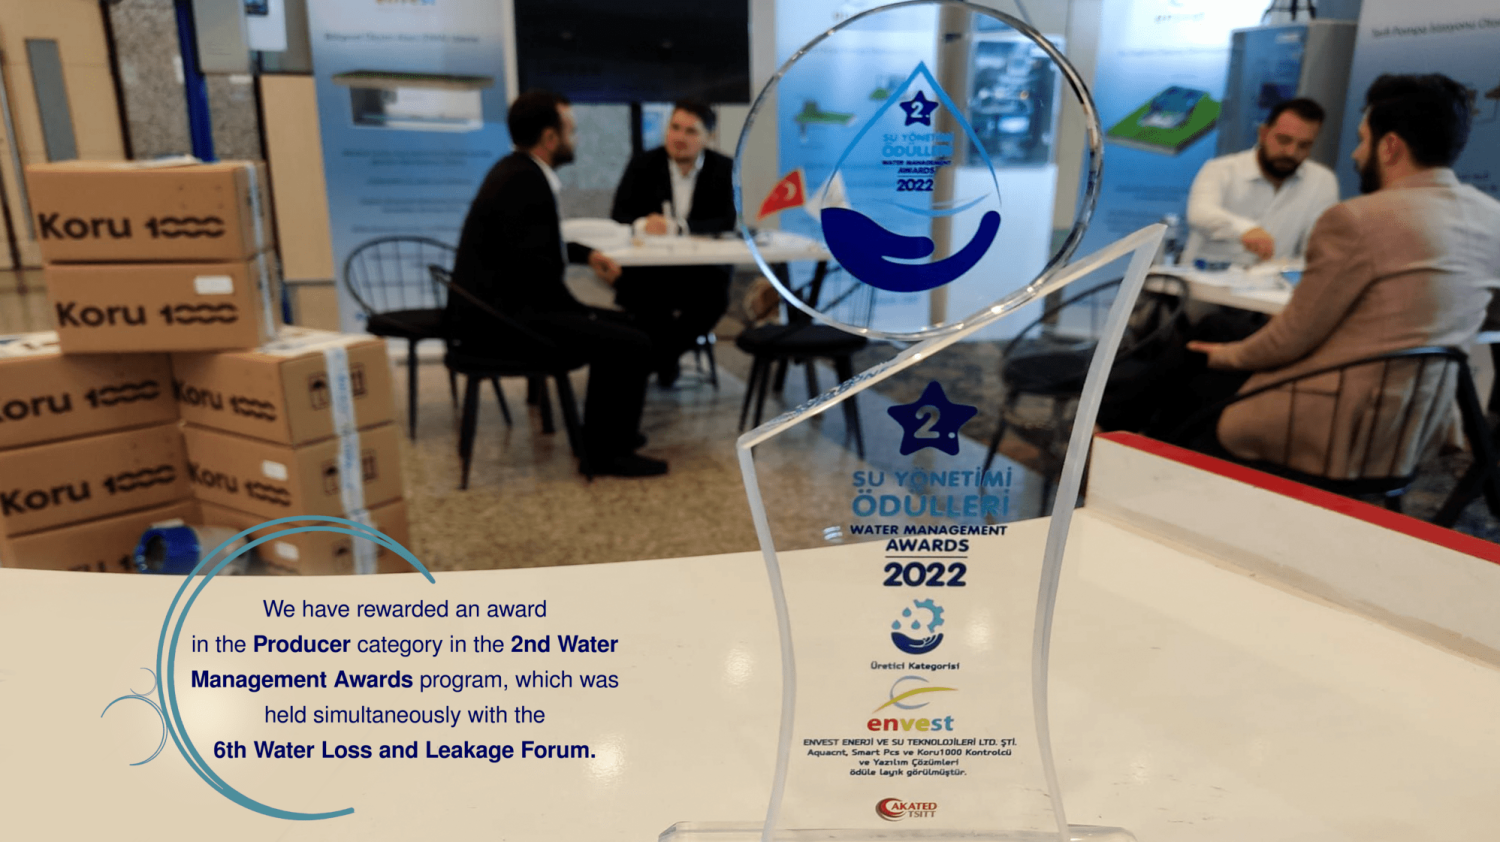 We were awarded in the Producer Category at the 2nd Water Management Awards.